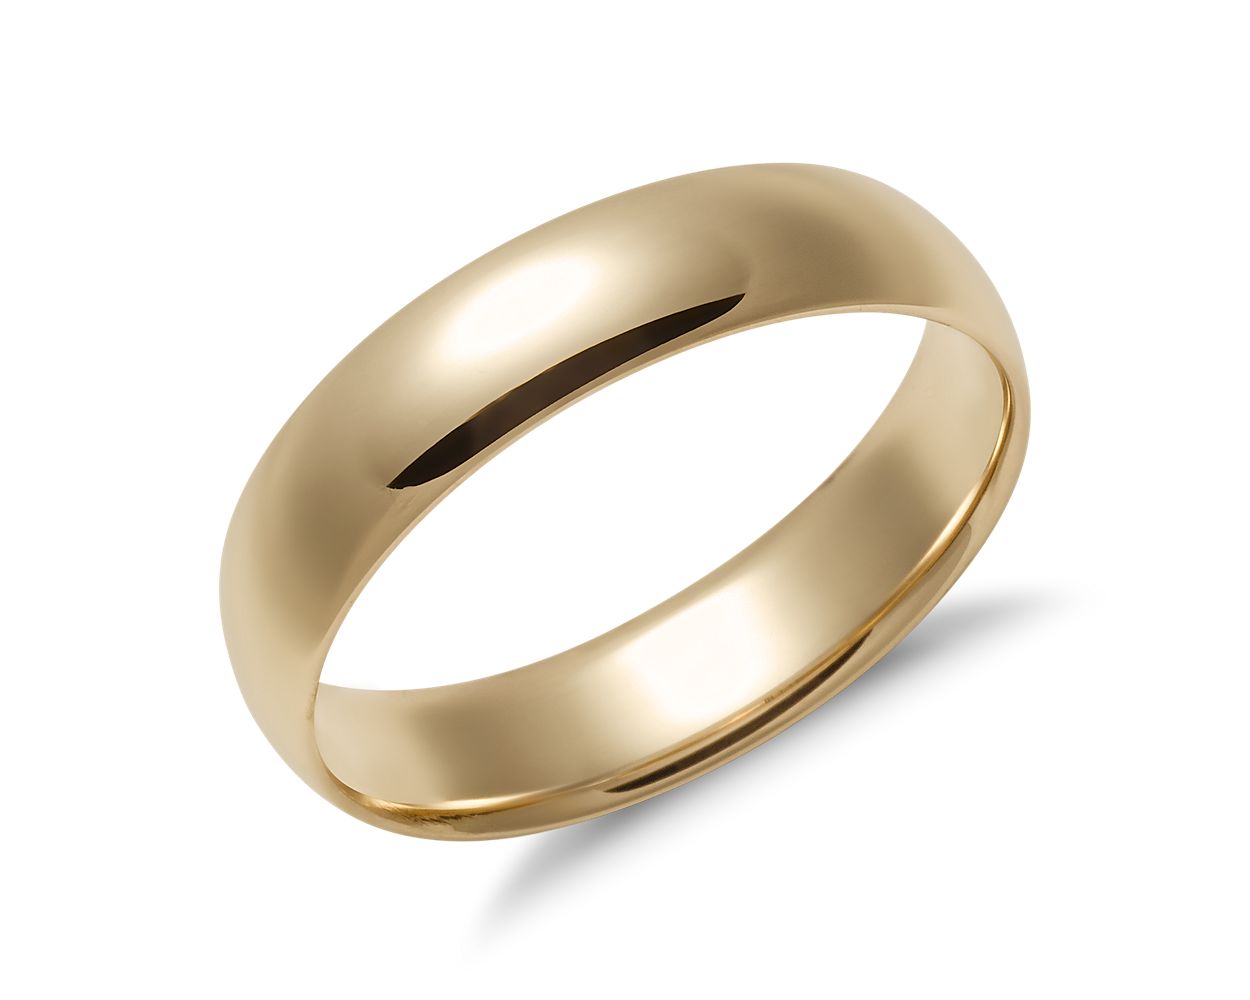 Mid-weight Comfort Fit Wedding Ring in 14k Yellow Gold (5mm)